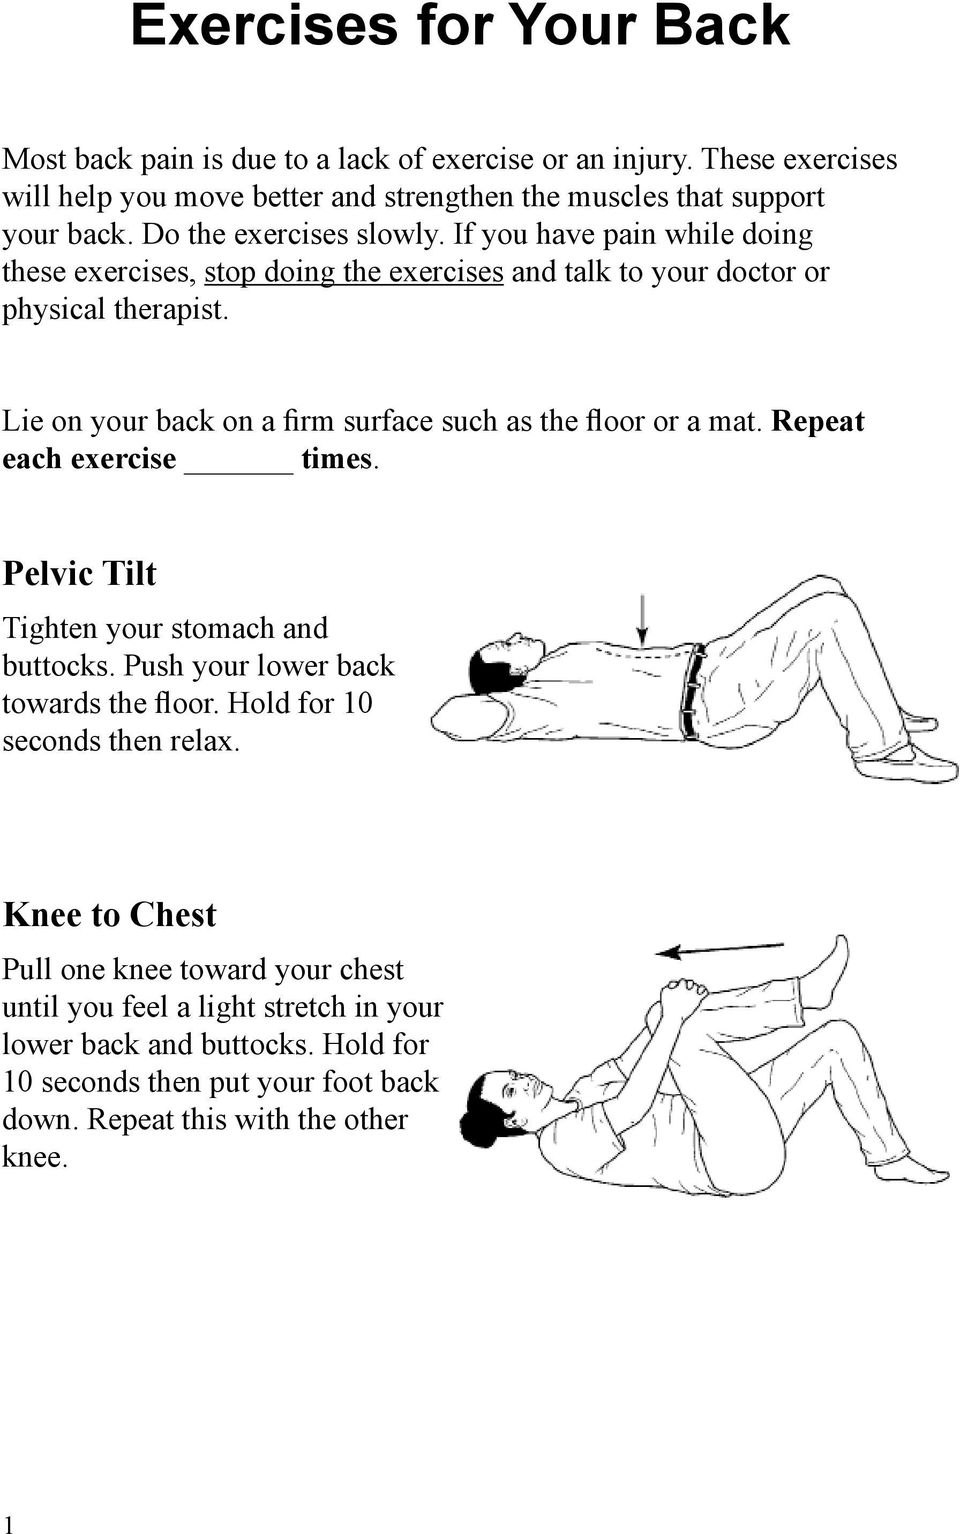 Lie on your back on a firm surface such as the floor or a mat. Repeat each exercise times. Pelvic Tilt Tighten your stomach and buttocks. Push your lower back towards the floor.